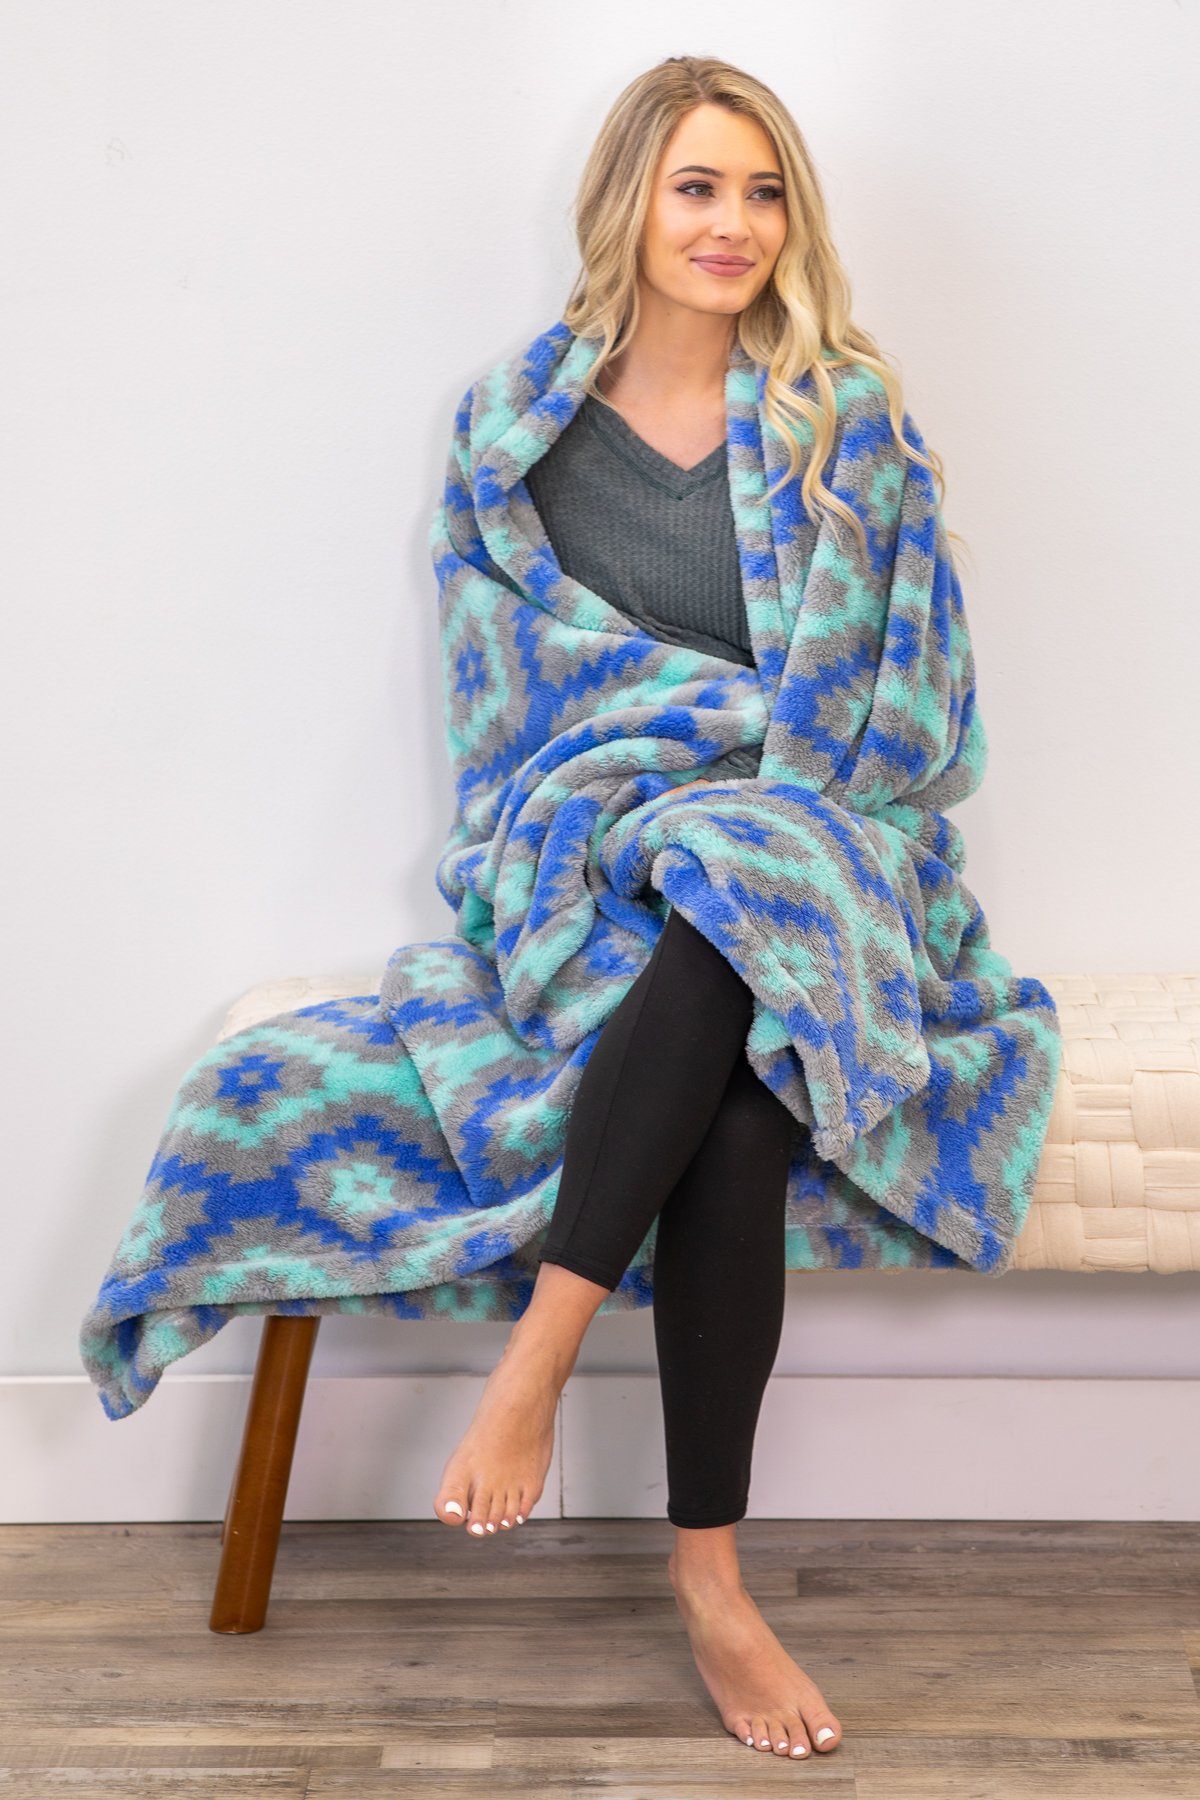 Turquoise and Grey Aztec Print Blanket - Filly Flair